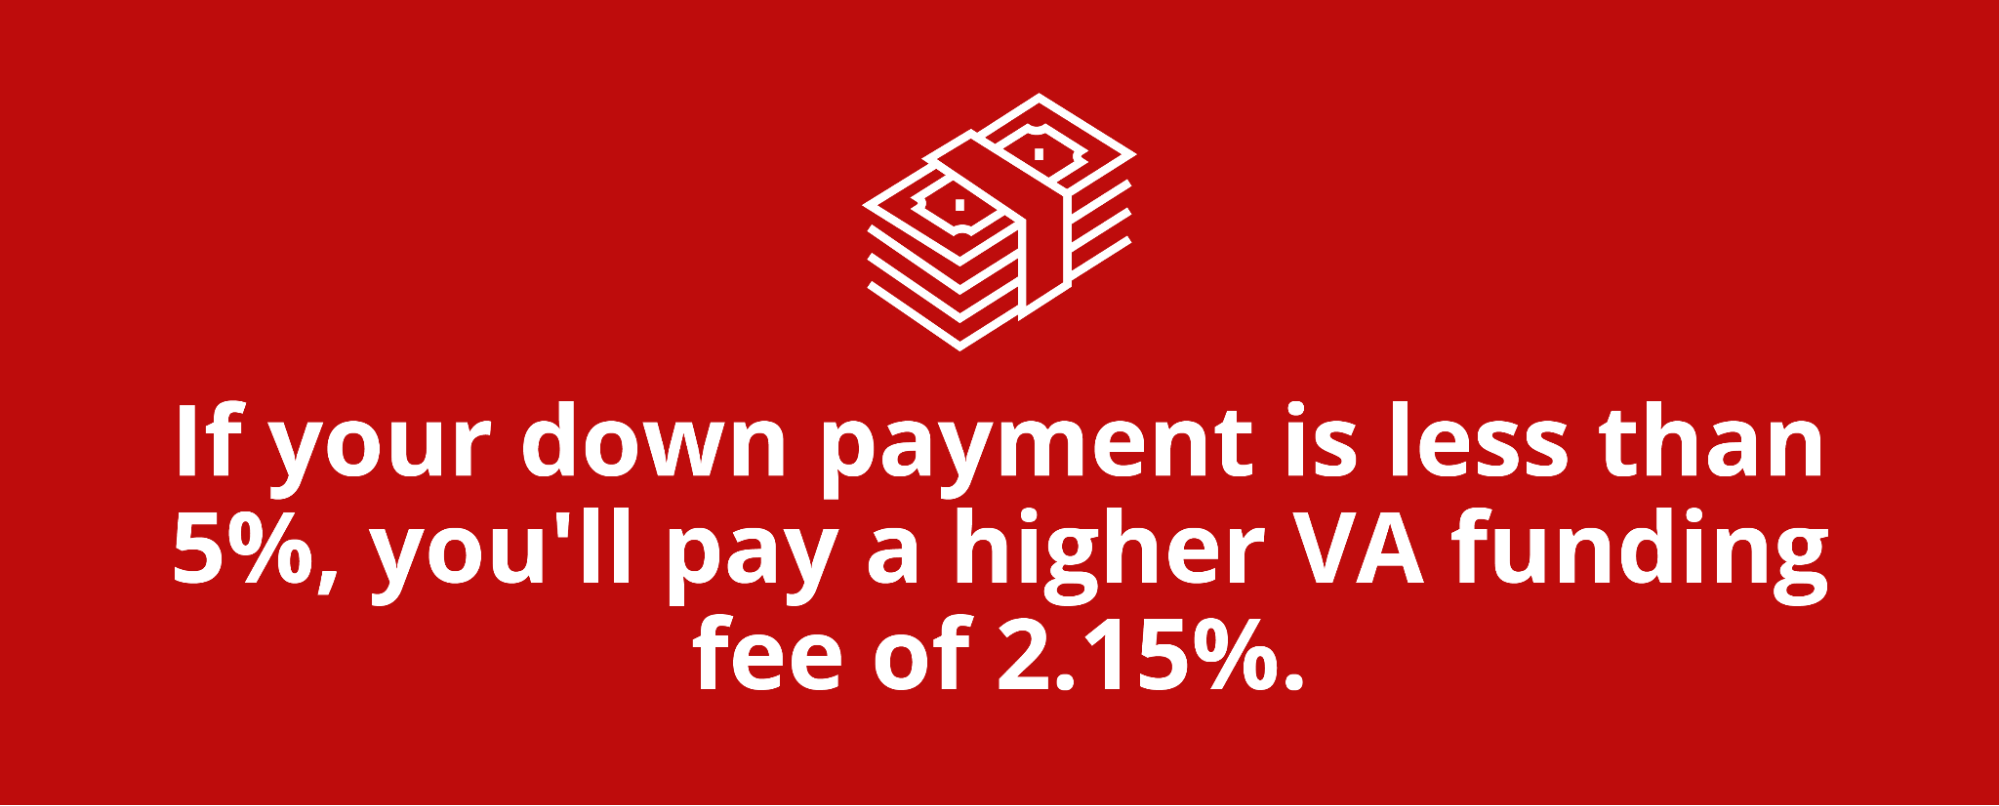 Graphic with a stack of money and text that reads, “If your down payment is less than 5%, you'll pay a higher VA funding fee of 2.15%.”